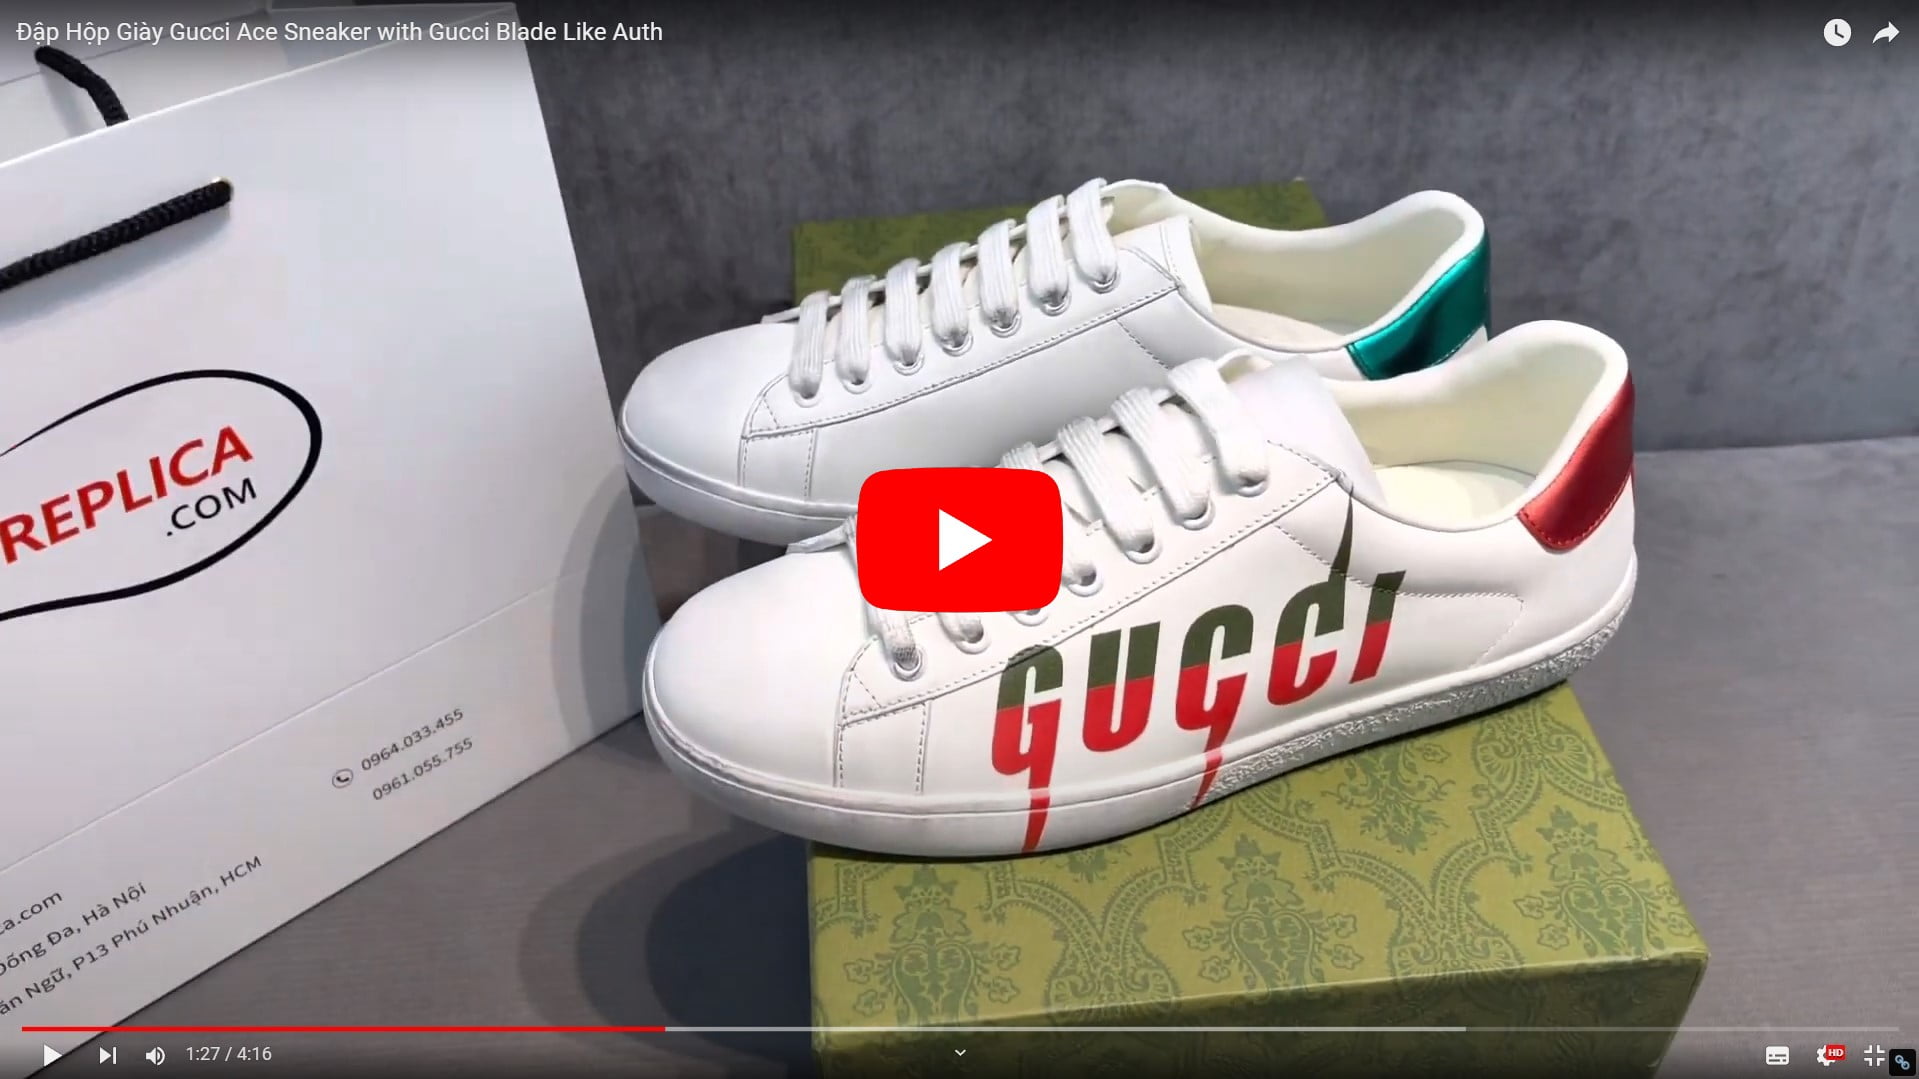 Video Gucci ace Blade like auth